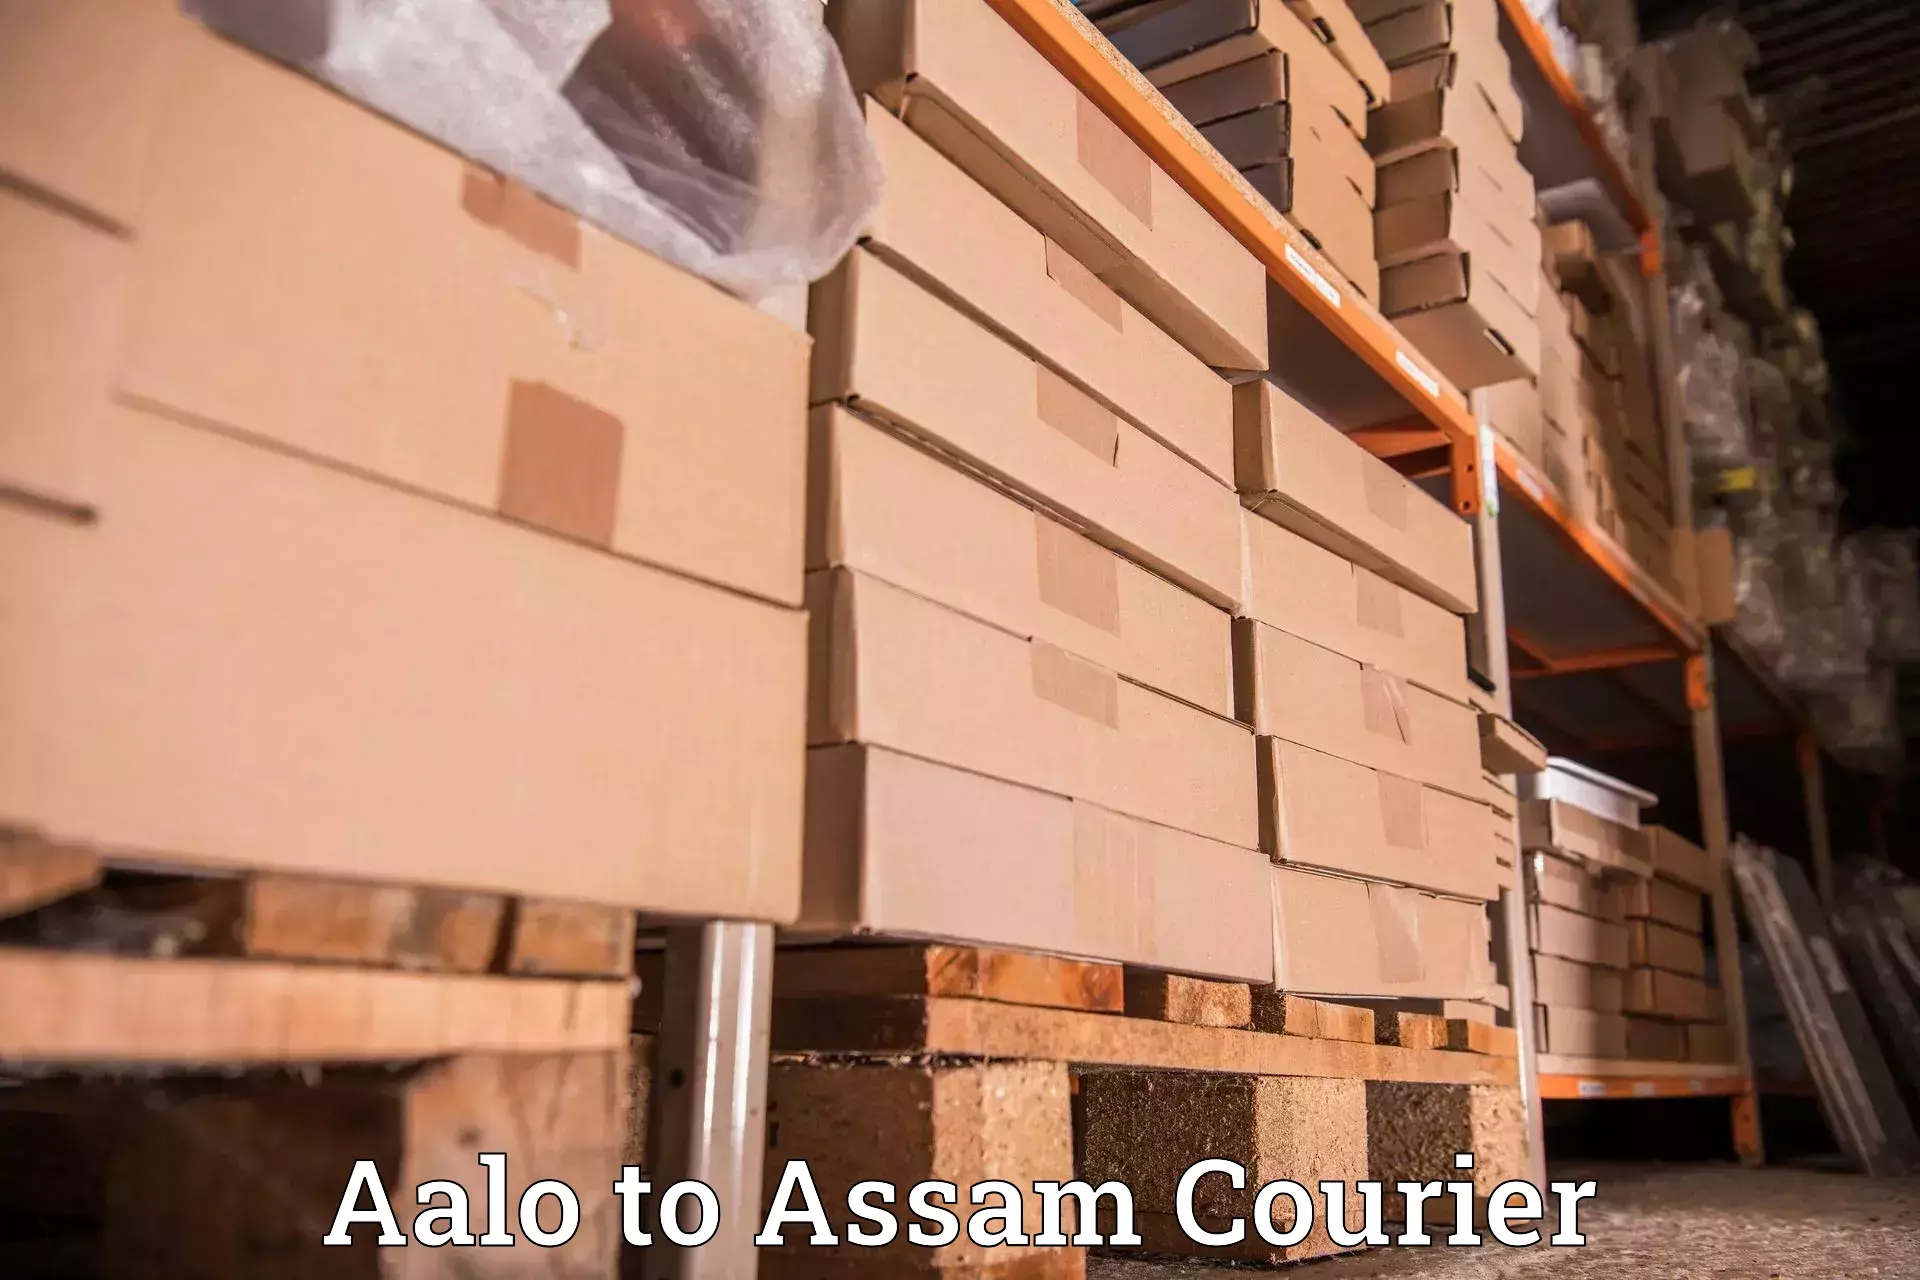 Business delivery service Aalo to Assam